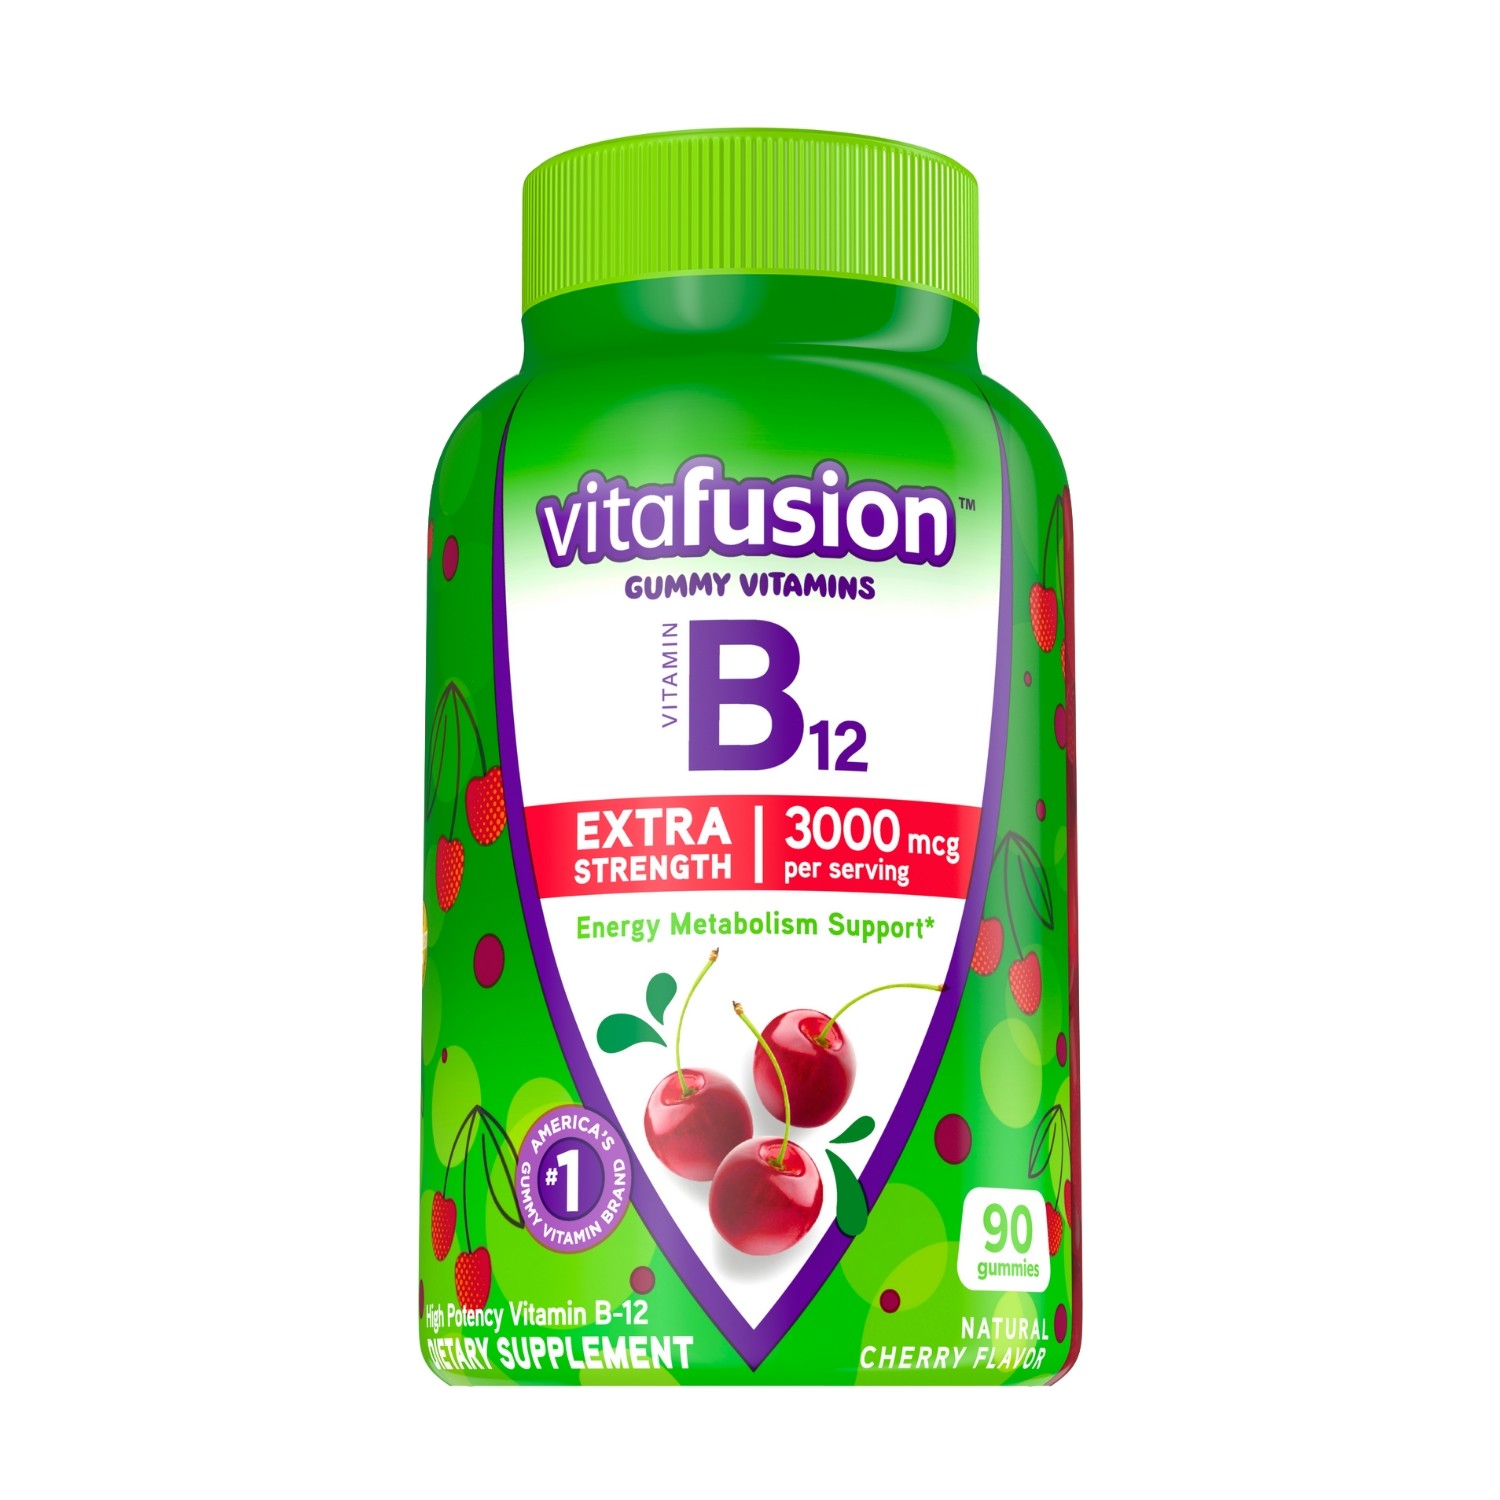 vitafusion Extra Strength Vitamin B12 Gummy Vitamins, Cherry Flavored, 90 Count - image 1 of 10